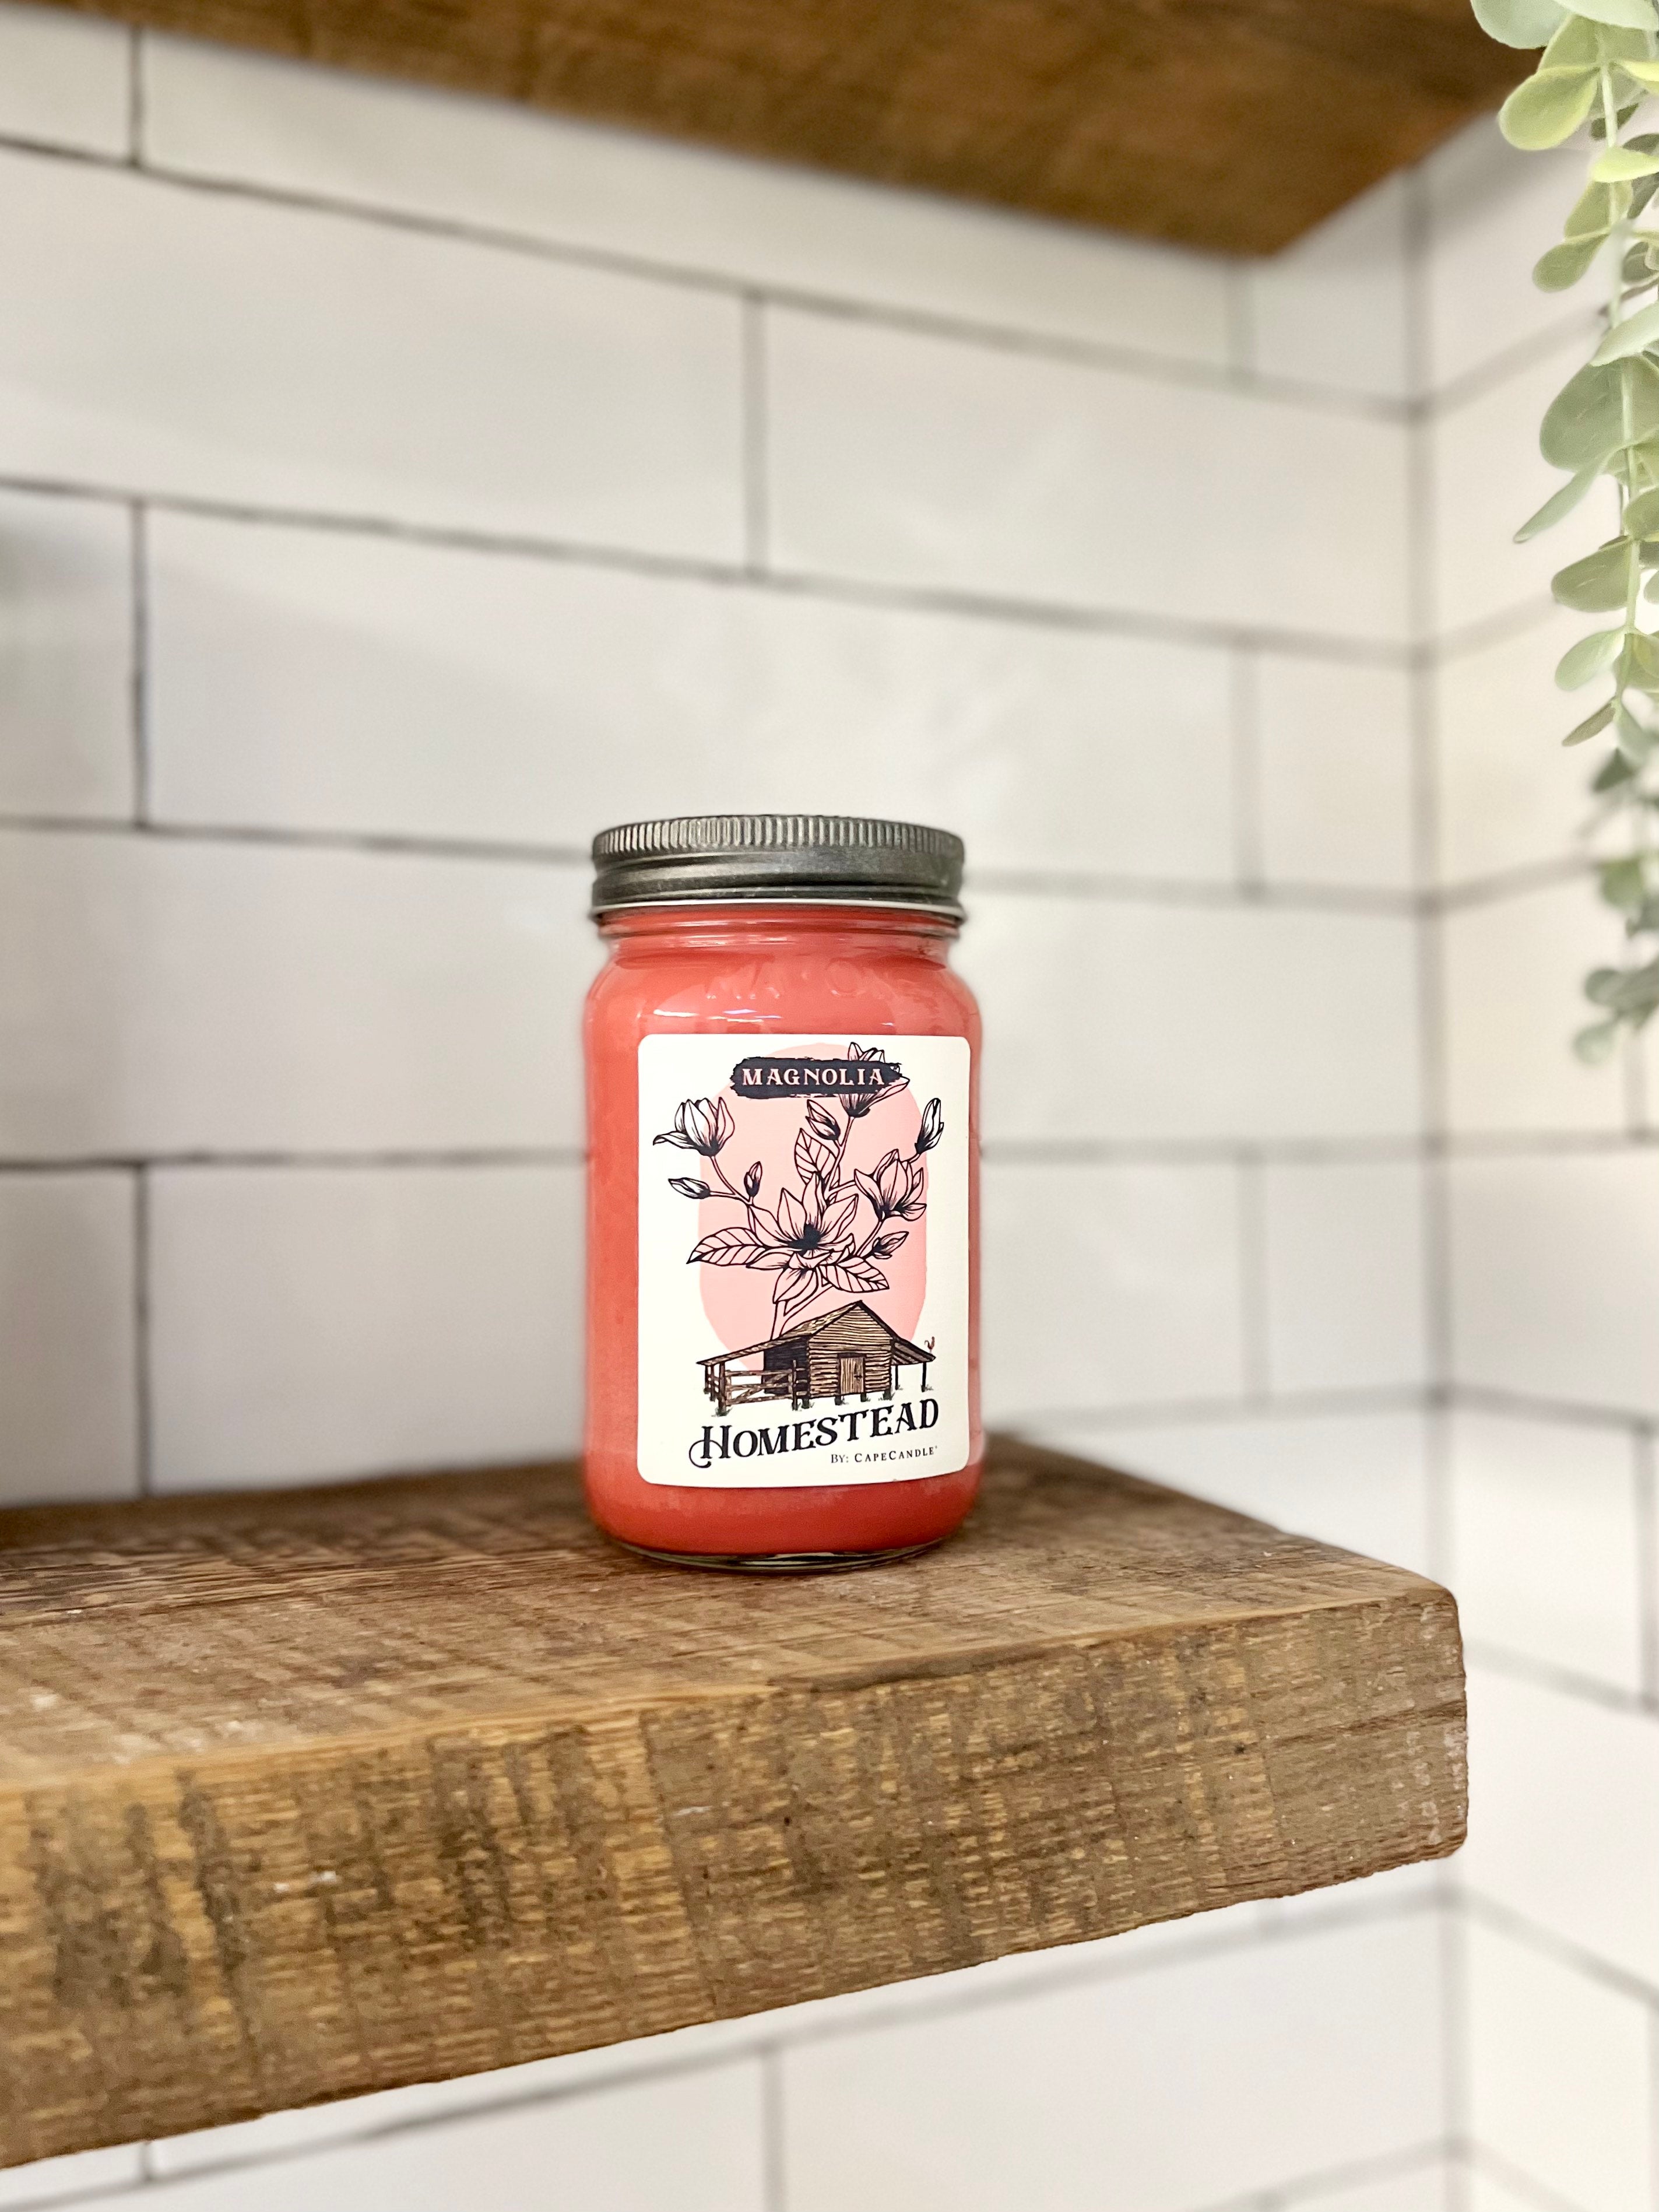 Homestead by Cape Candle